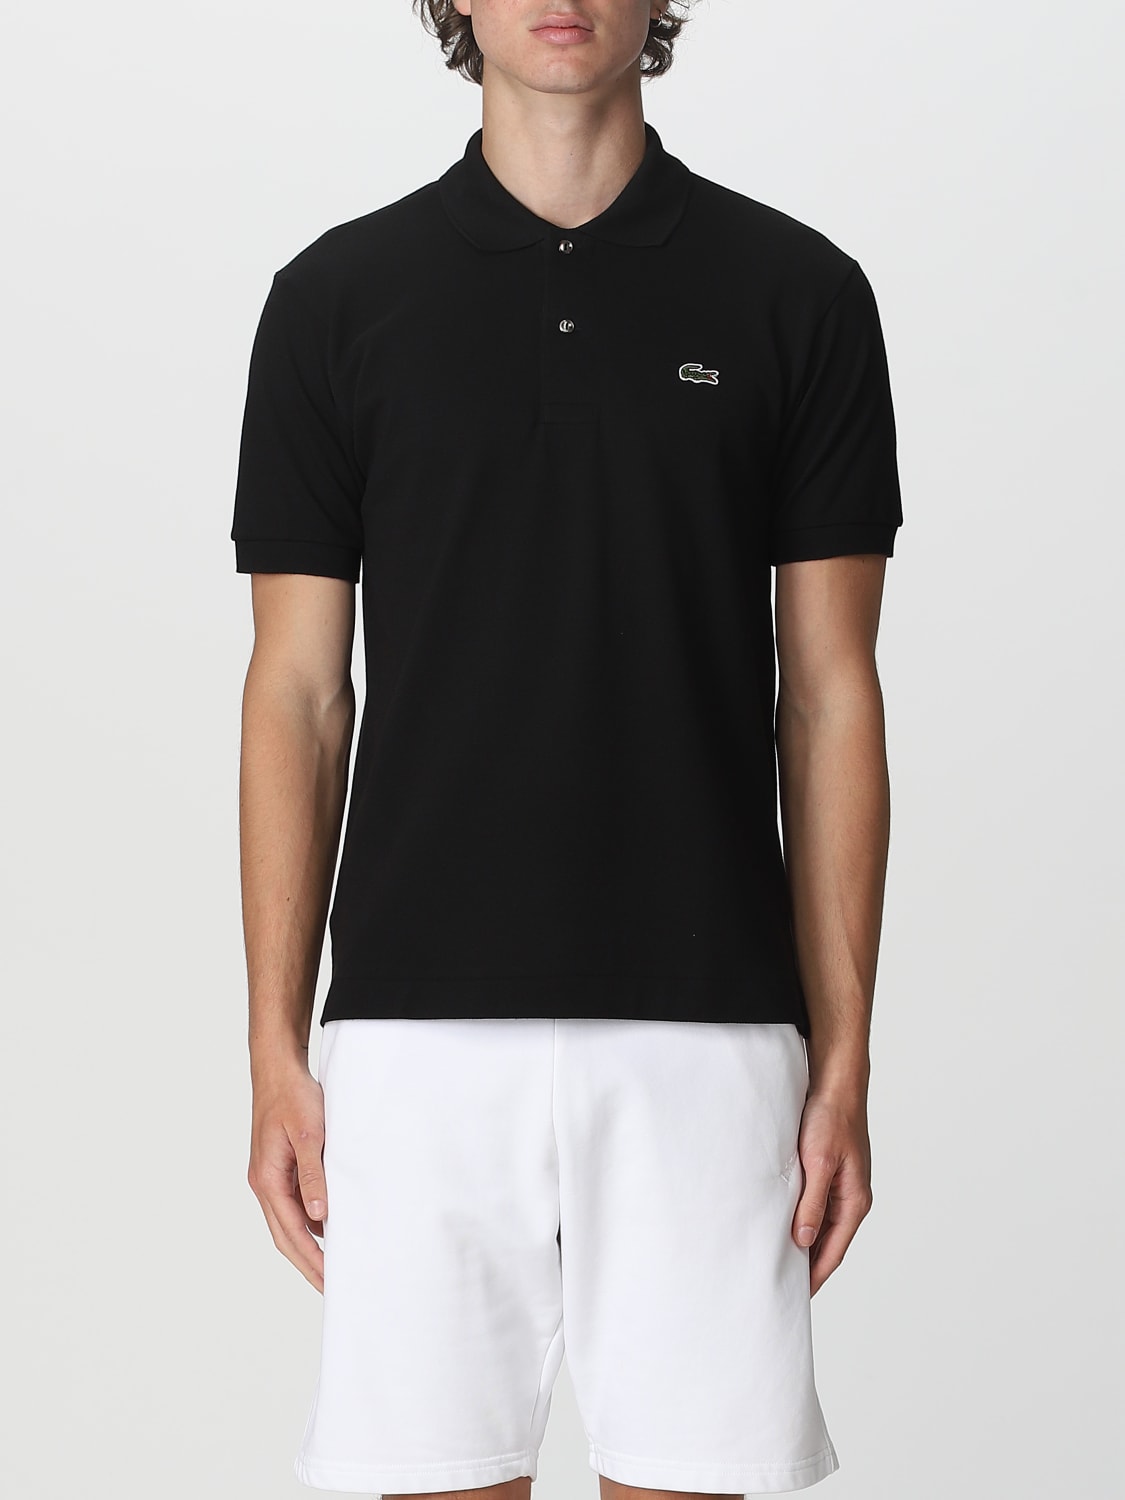 LACOSTE: sweater for man - Black | Lacoste sweater 1212 online on ...